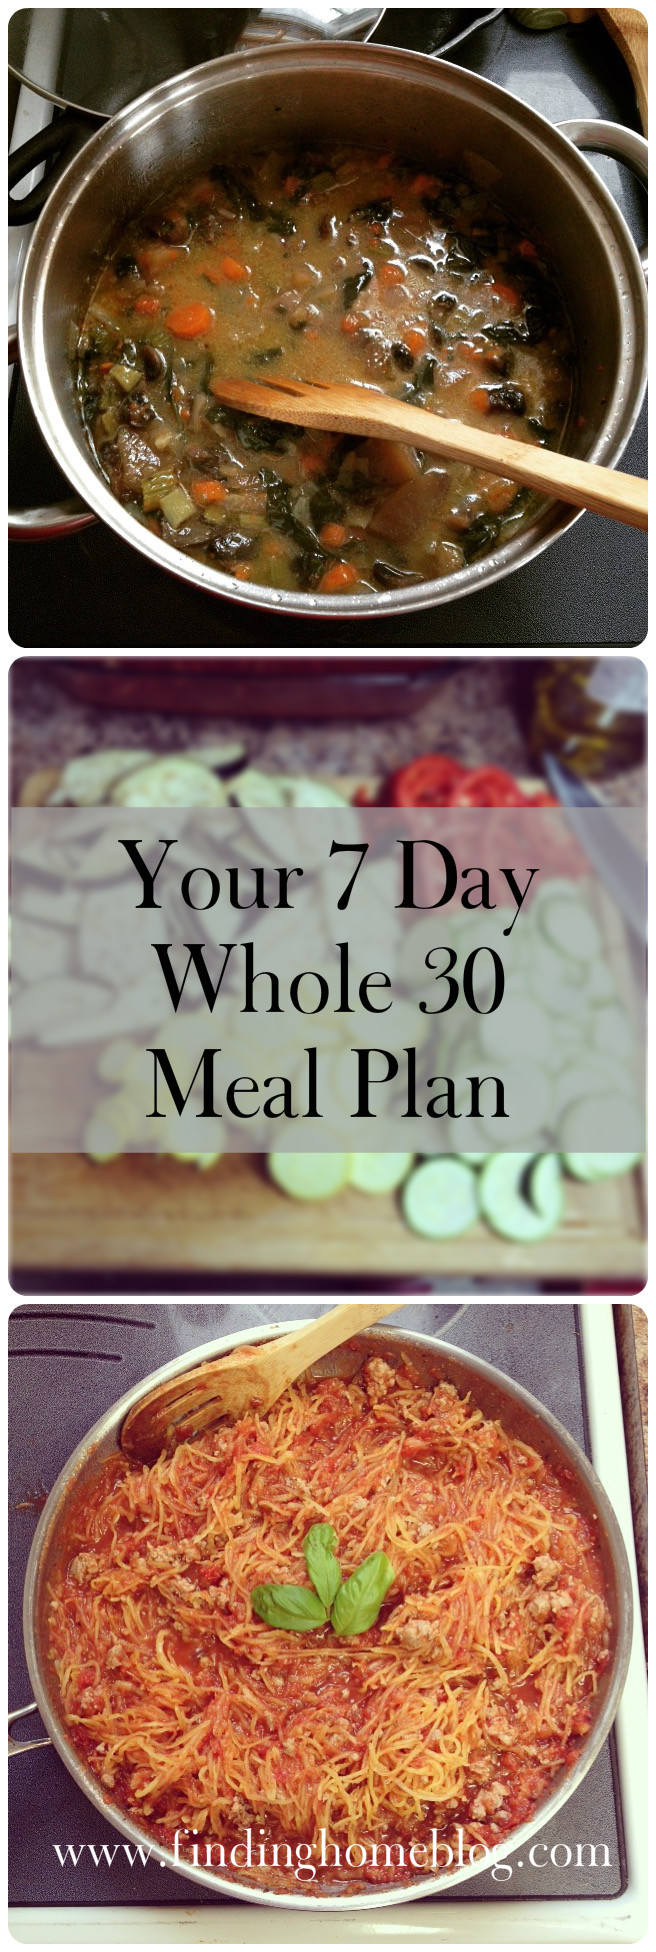 Whole 30 Meal Plan #1 | Finding Home Blog